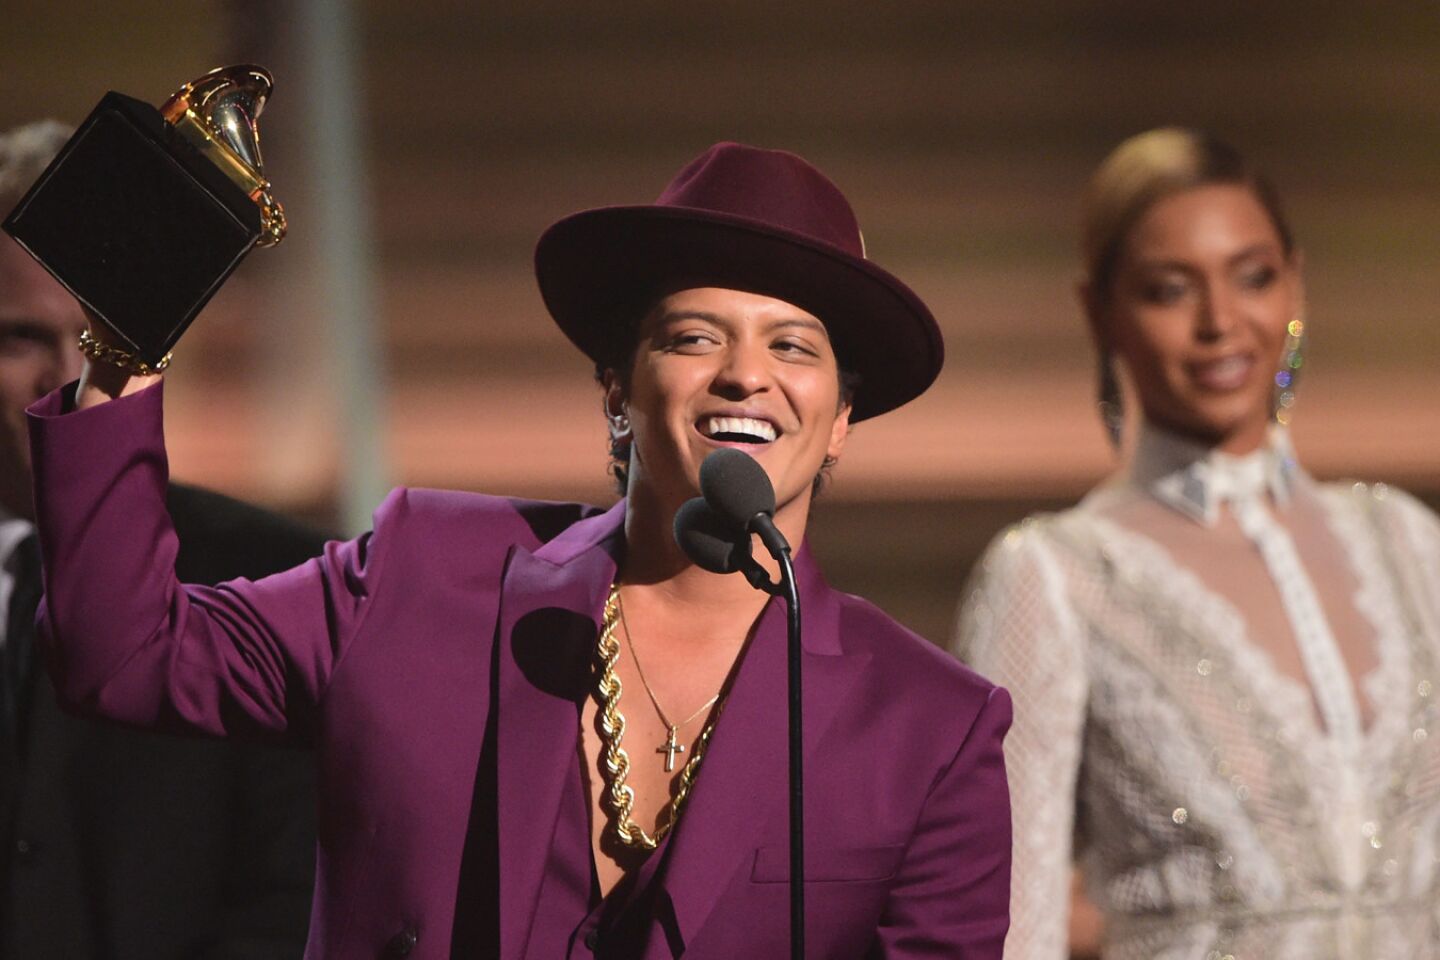 Bruno Mars holds up the award for record of the year for "Uptown Funk" as he thanks the fans.